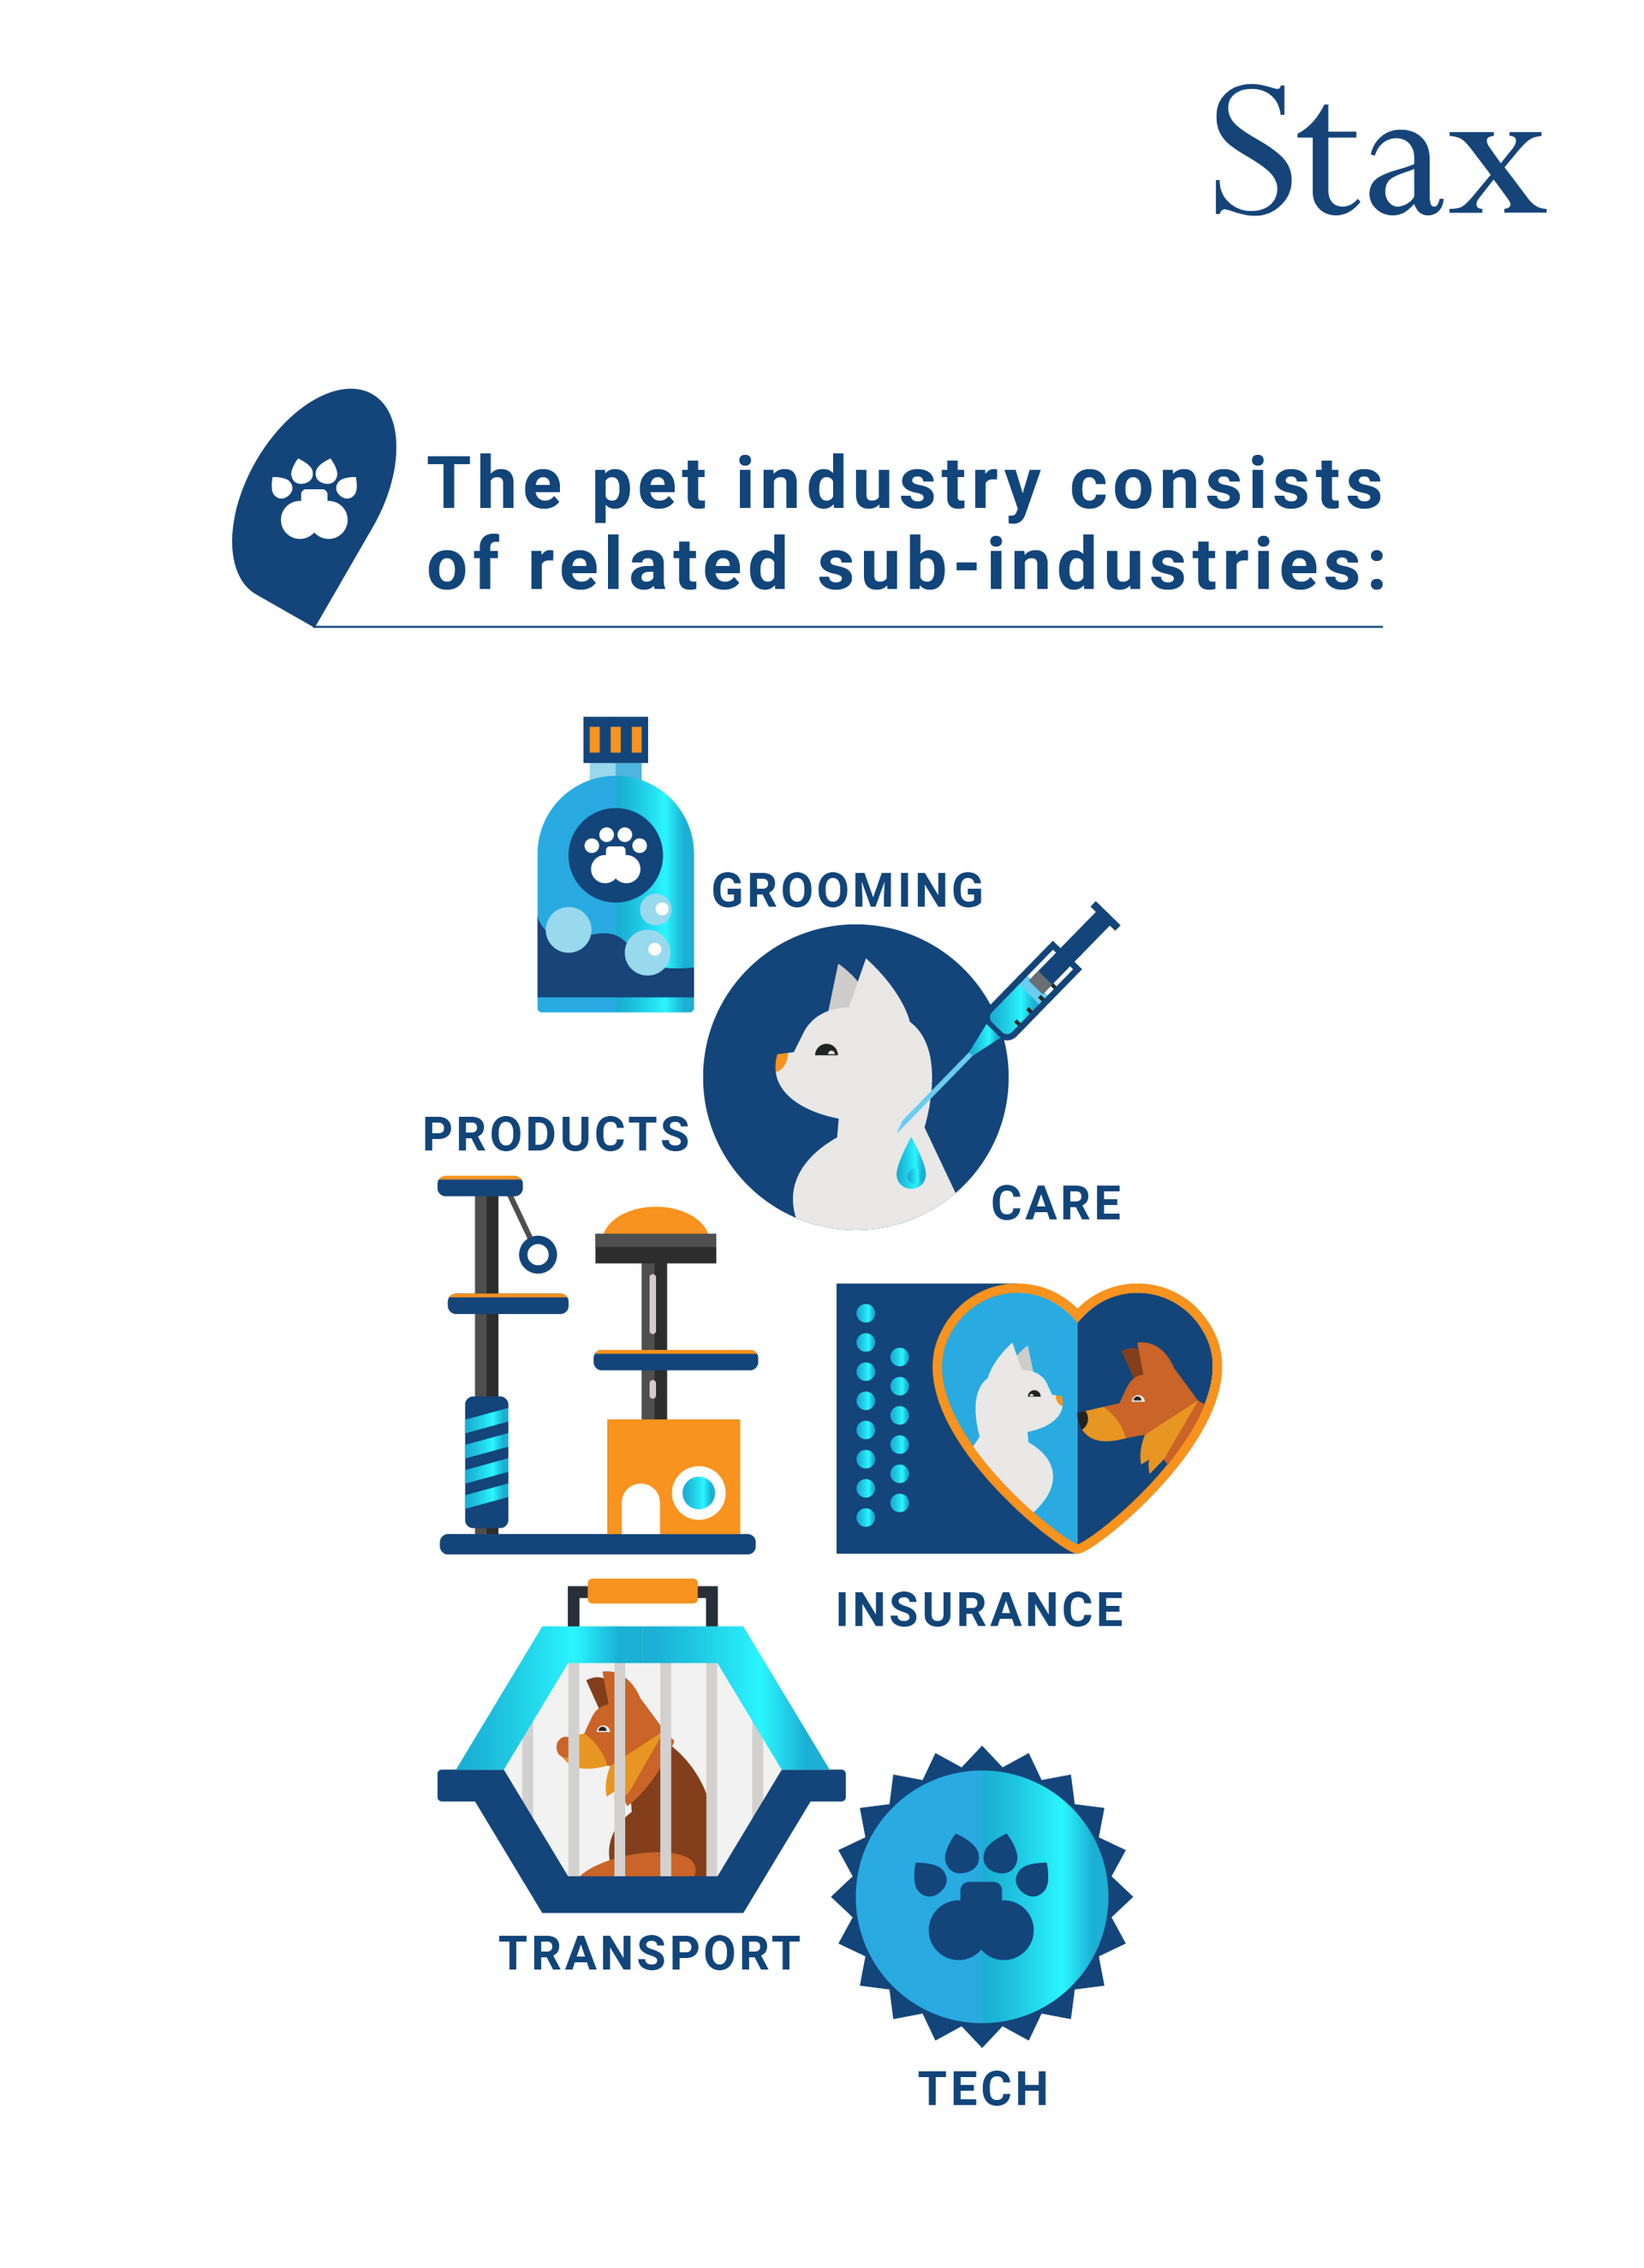 The pet industry consists of the following sub-industries: grooming, care, products, insurance, transport, and technology.